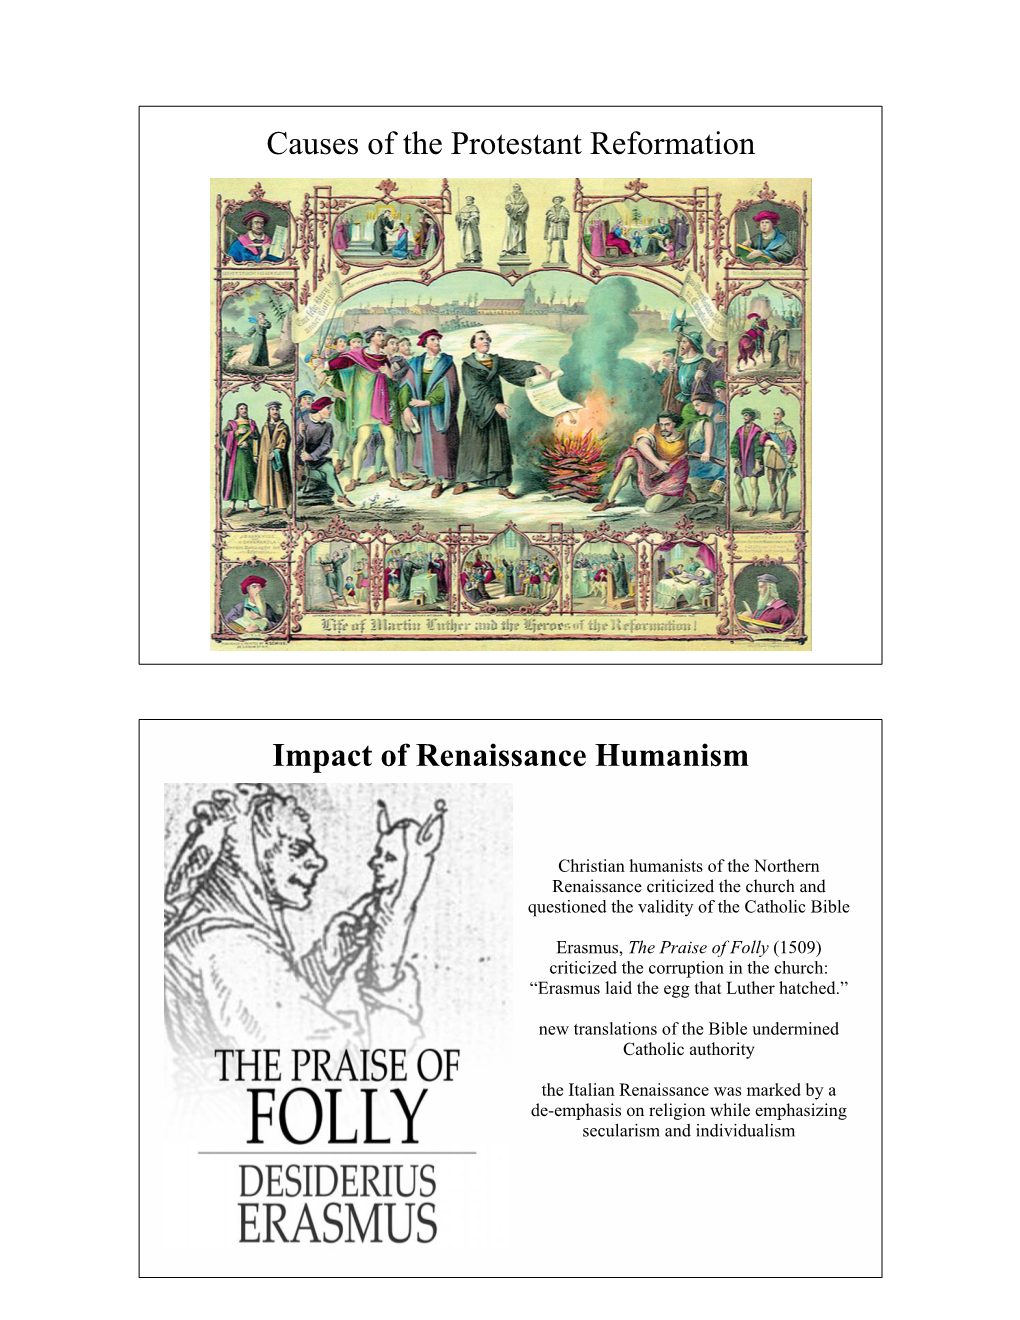 Causes of the Protestant Reformation Presentation